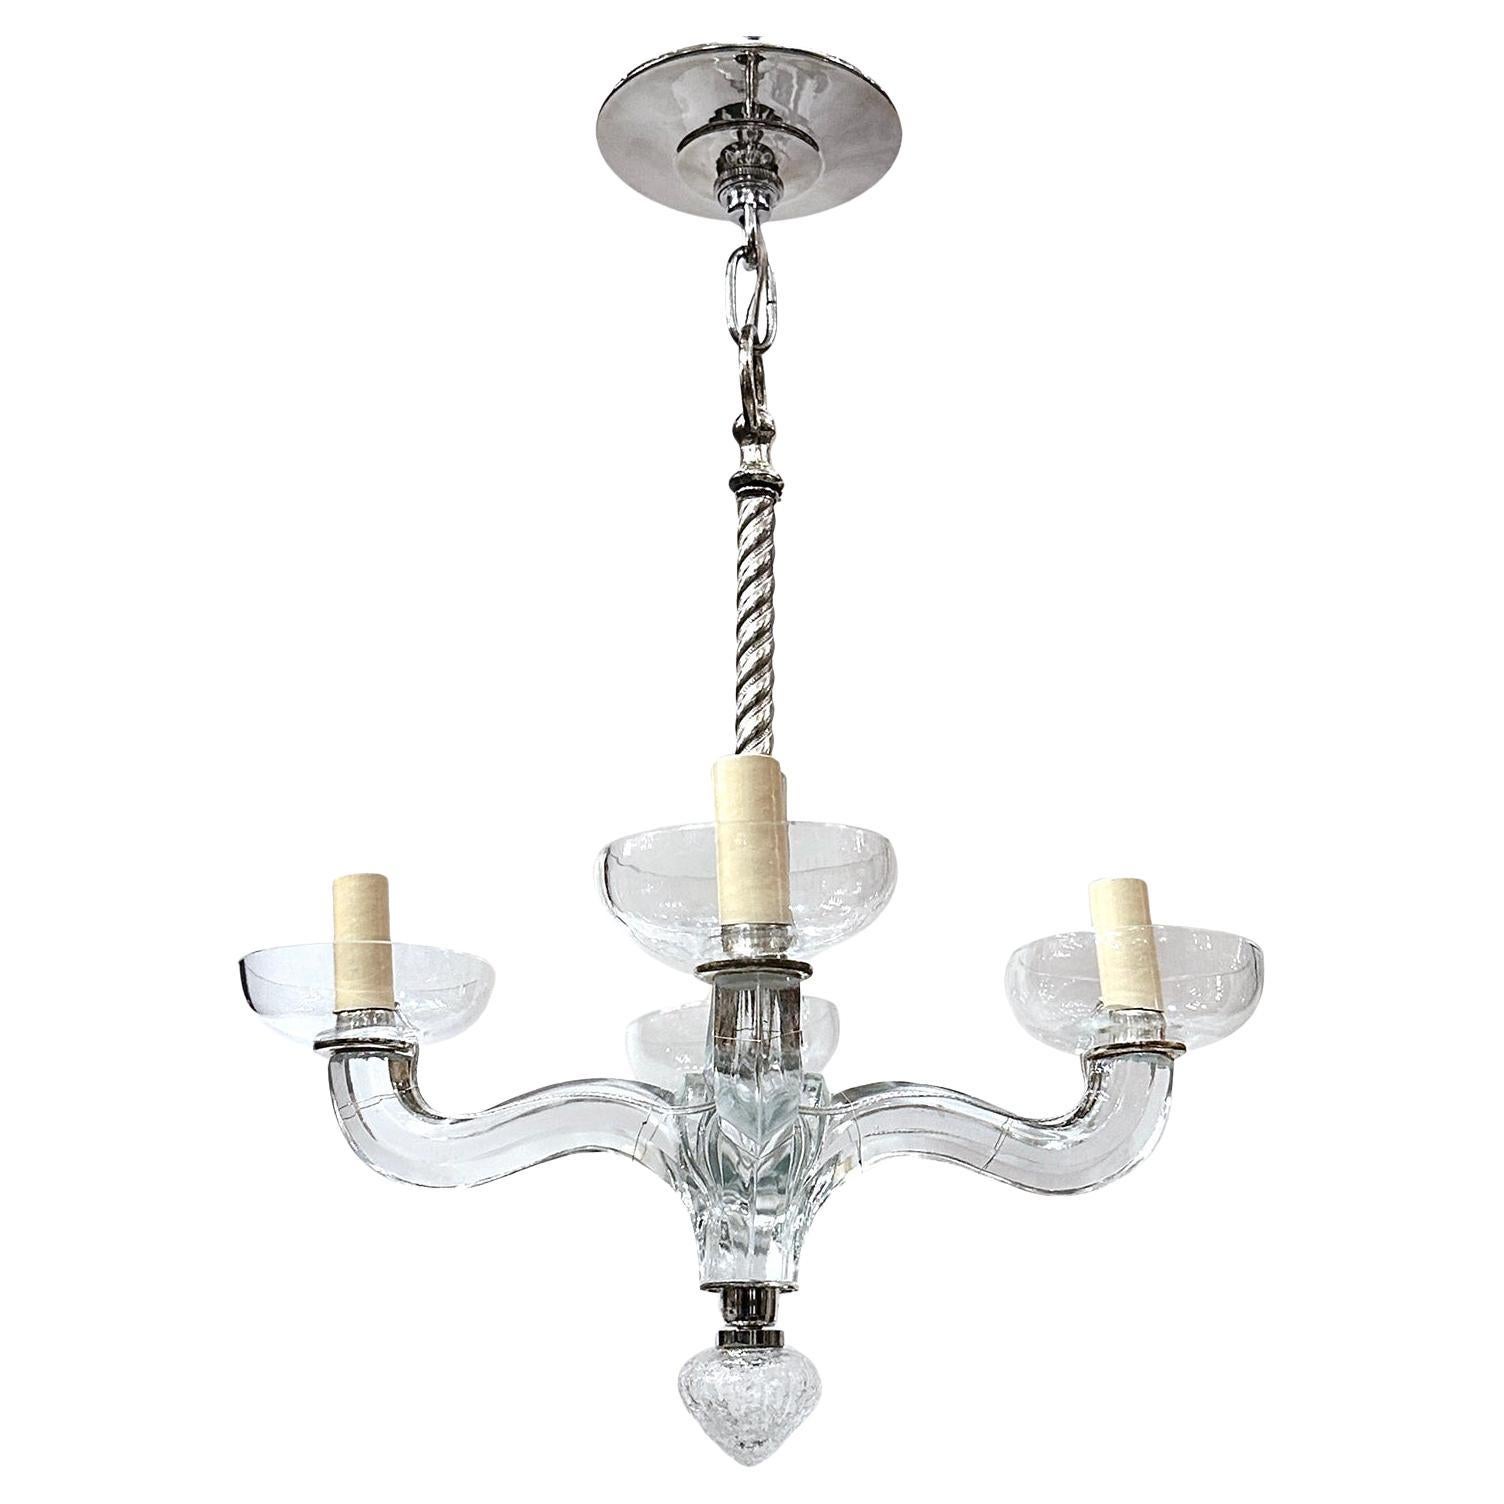 Set of French Molded Glass Chandeliers